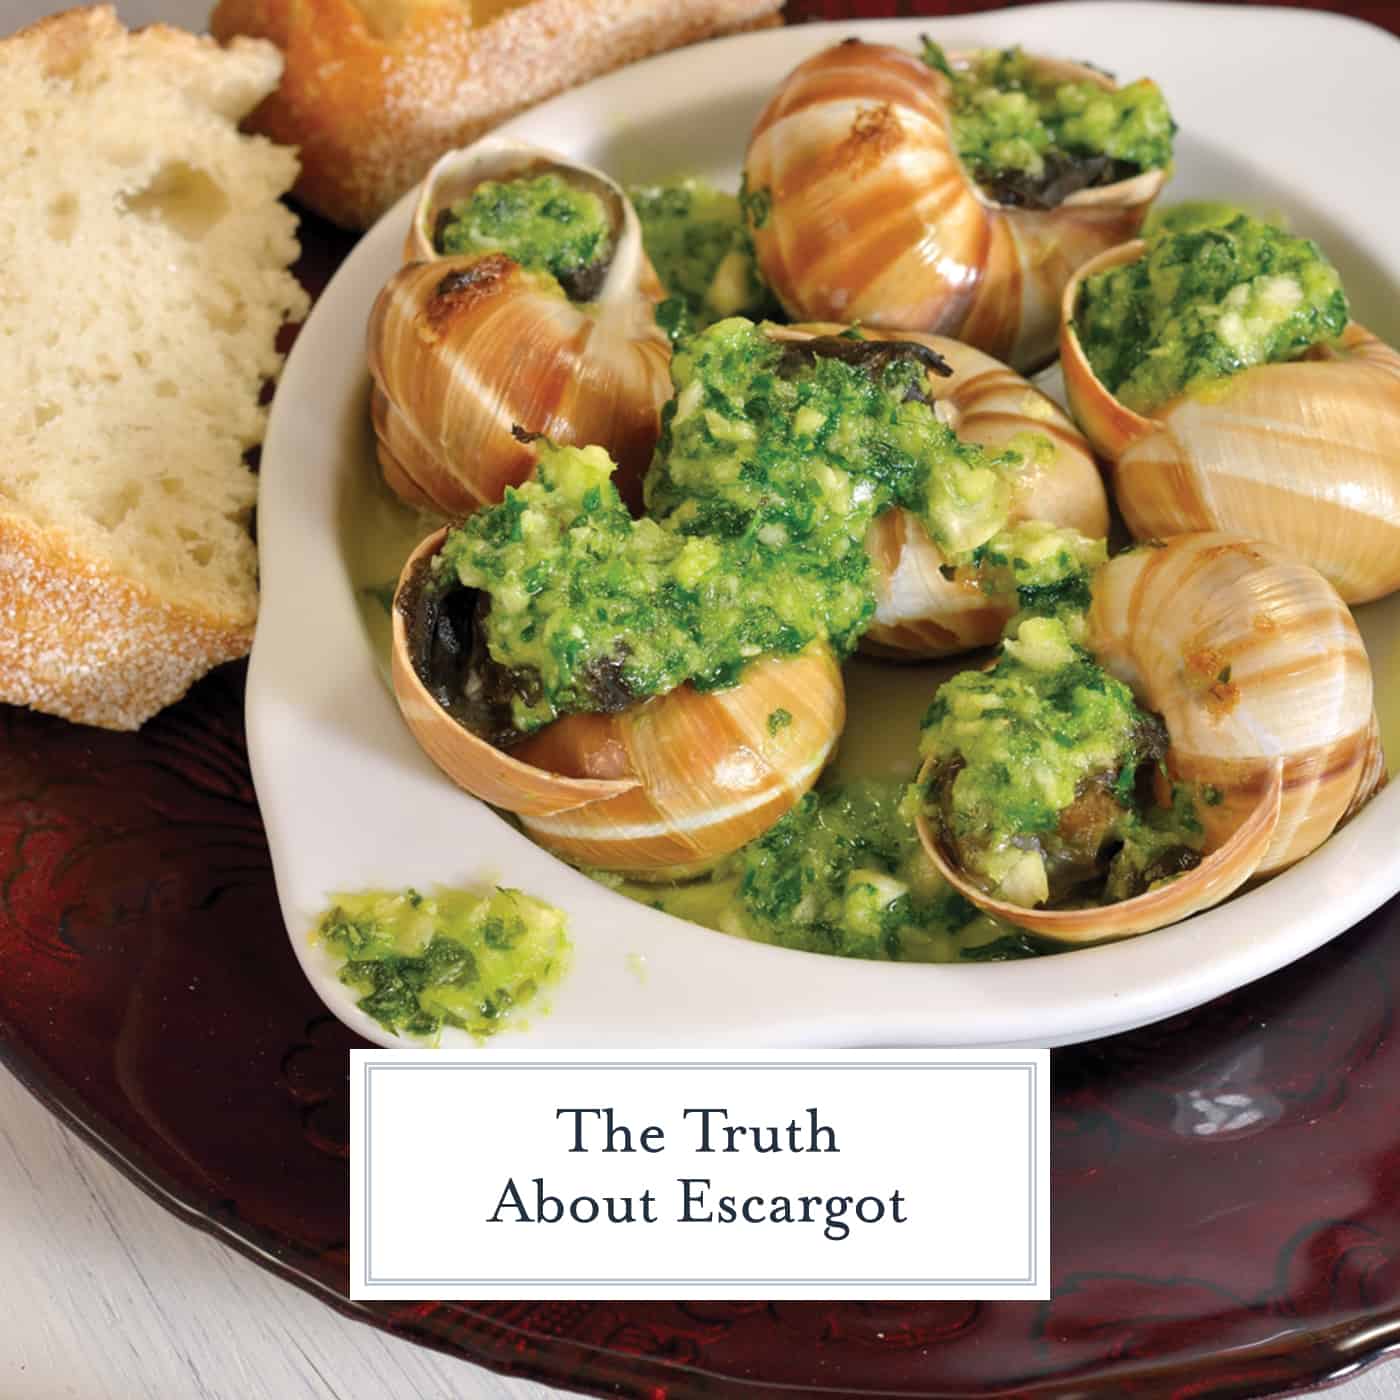 Escargot aren't nearly as difficult to make at home as you might think. Here are a few tips on how to make escargot! #escargot #howtomakeescargot www.savoryexperiments.com